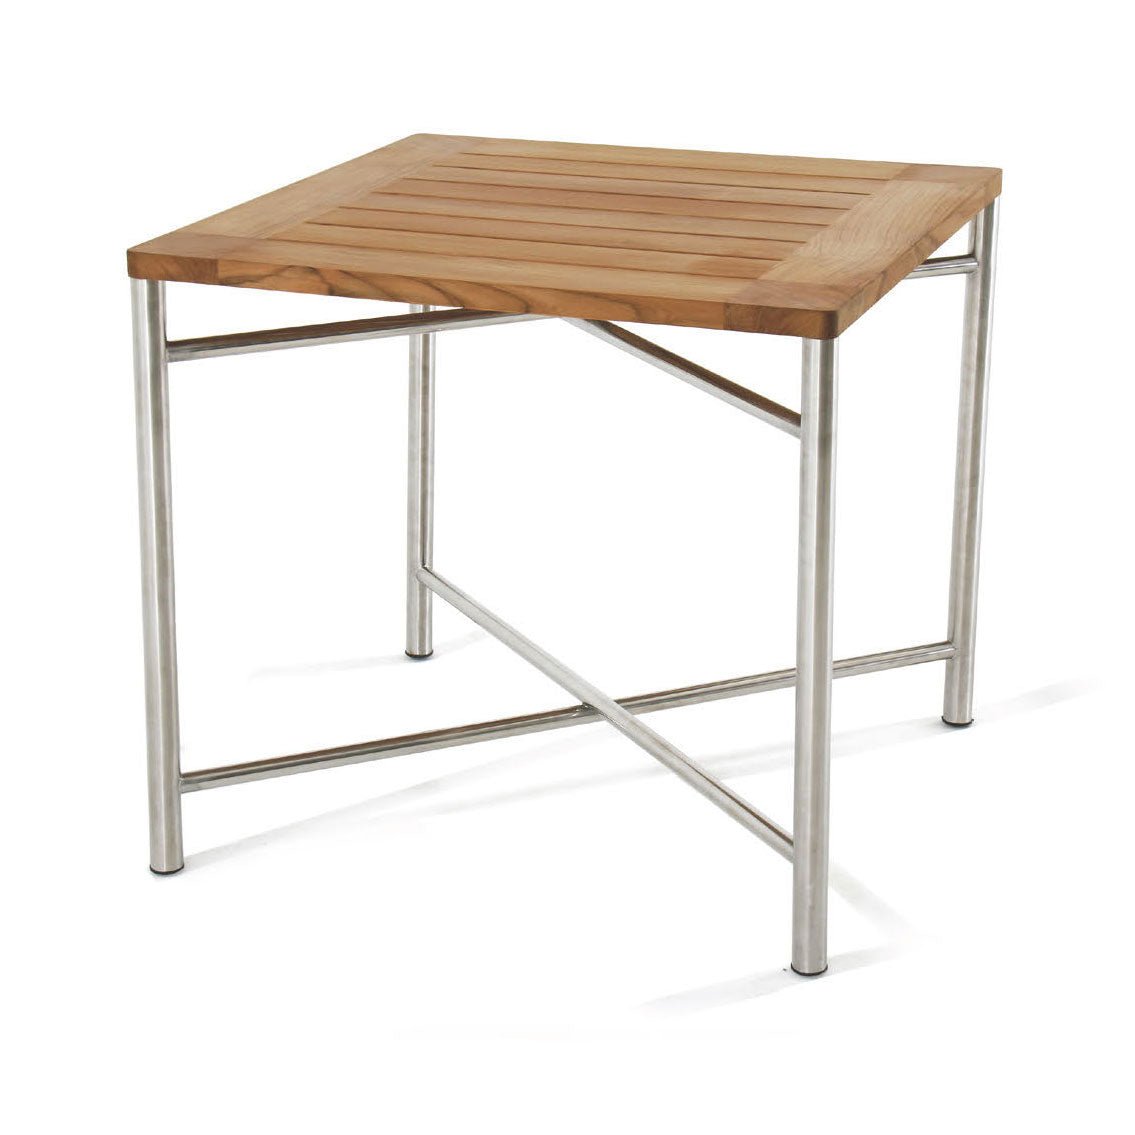 Westminster Teak - Odyssey Table Teak and 316L Stainless Steel - 25815